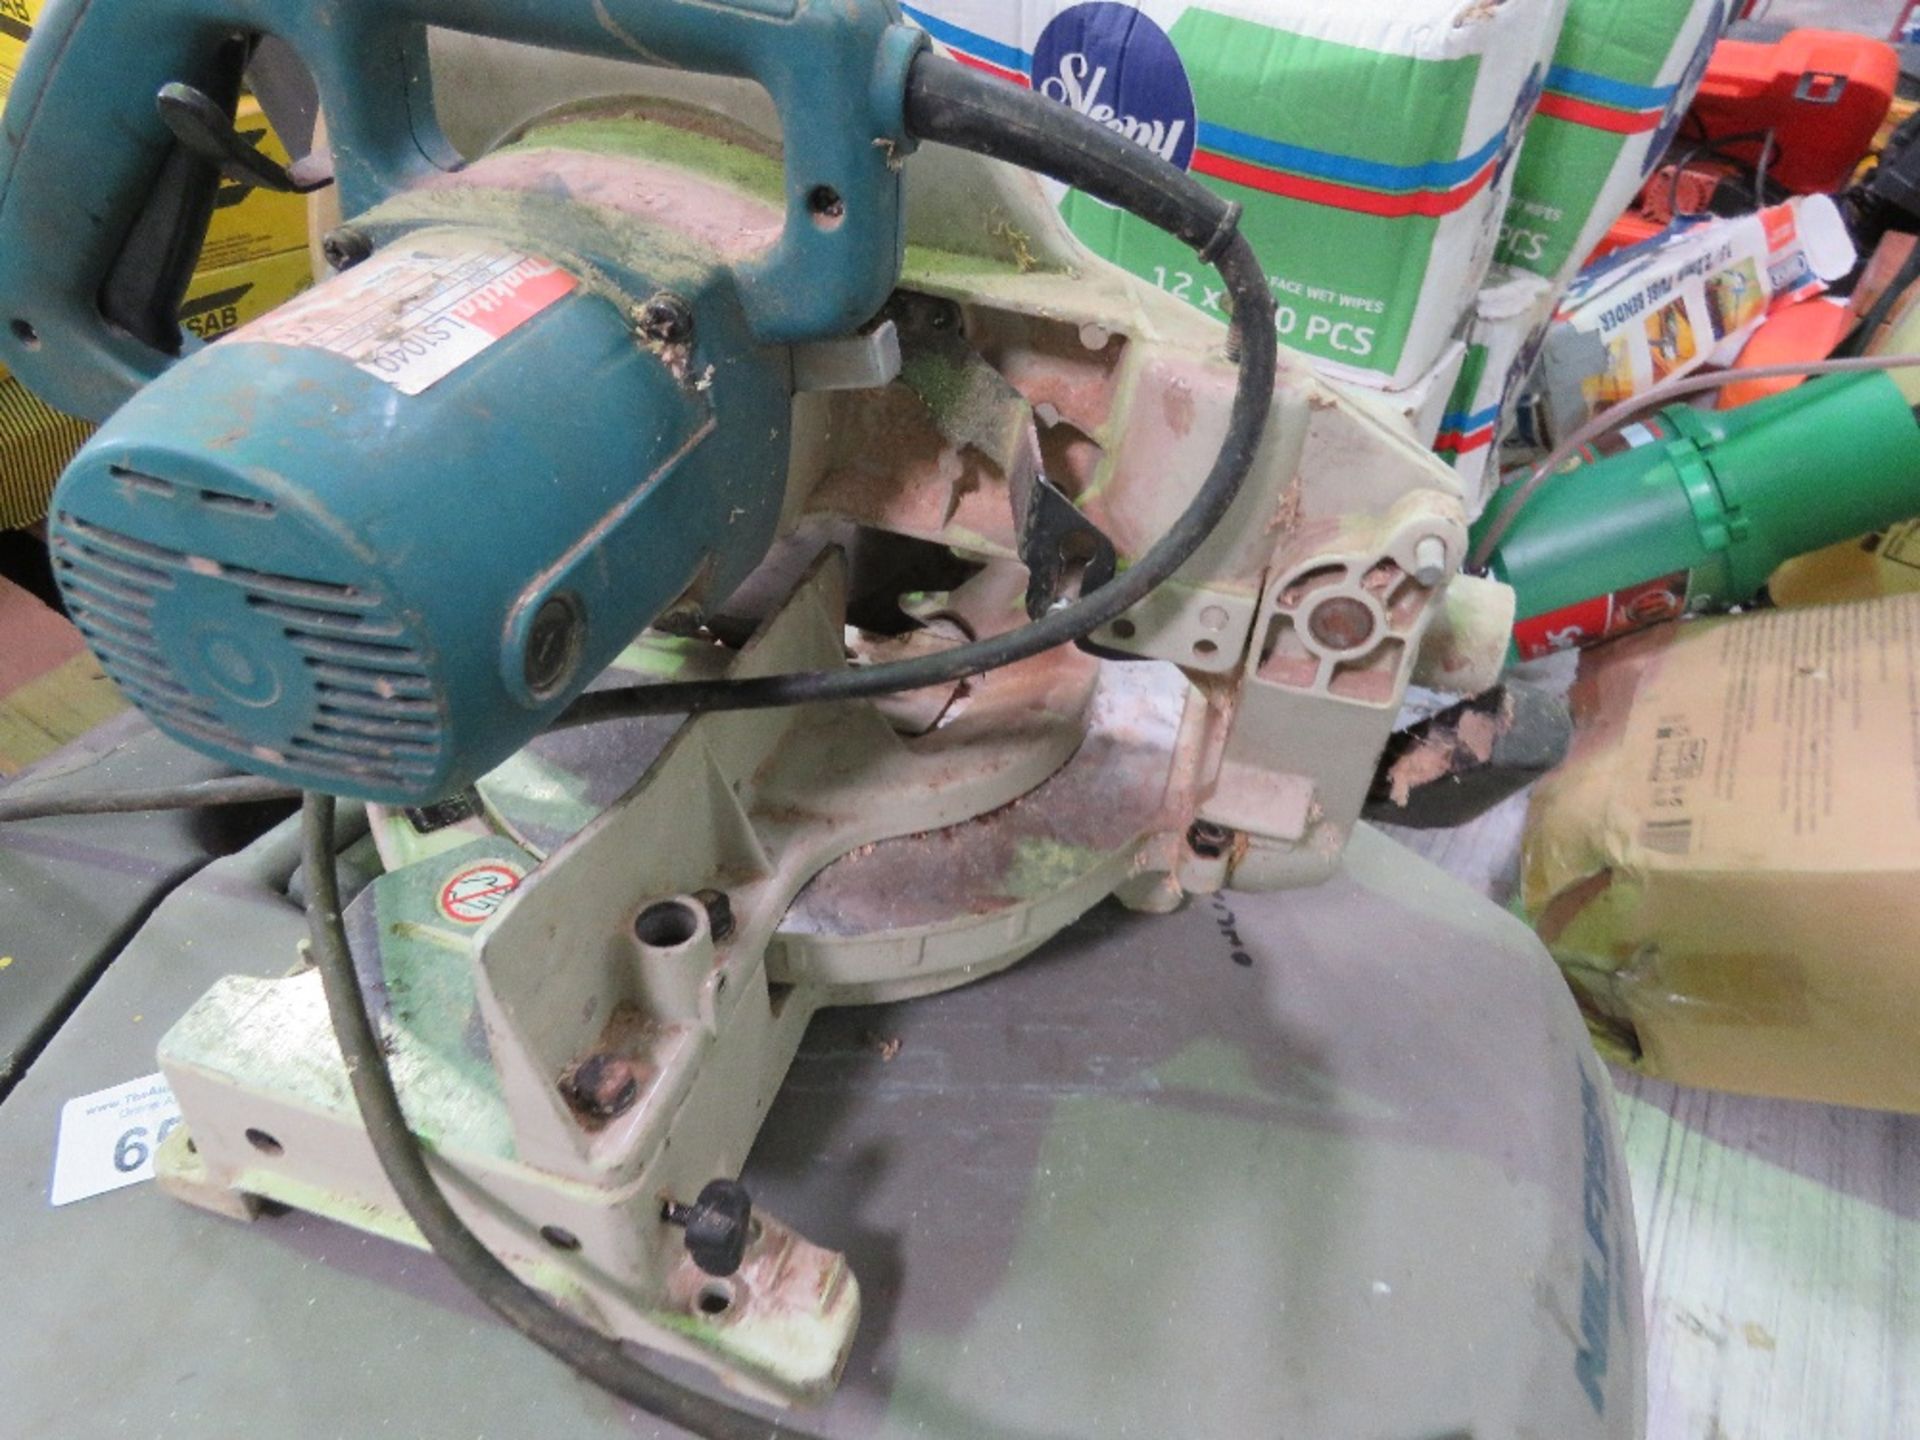 2 X MITRE SAWS, ELECTRIC POWERED - Image 6 of 9